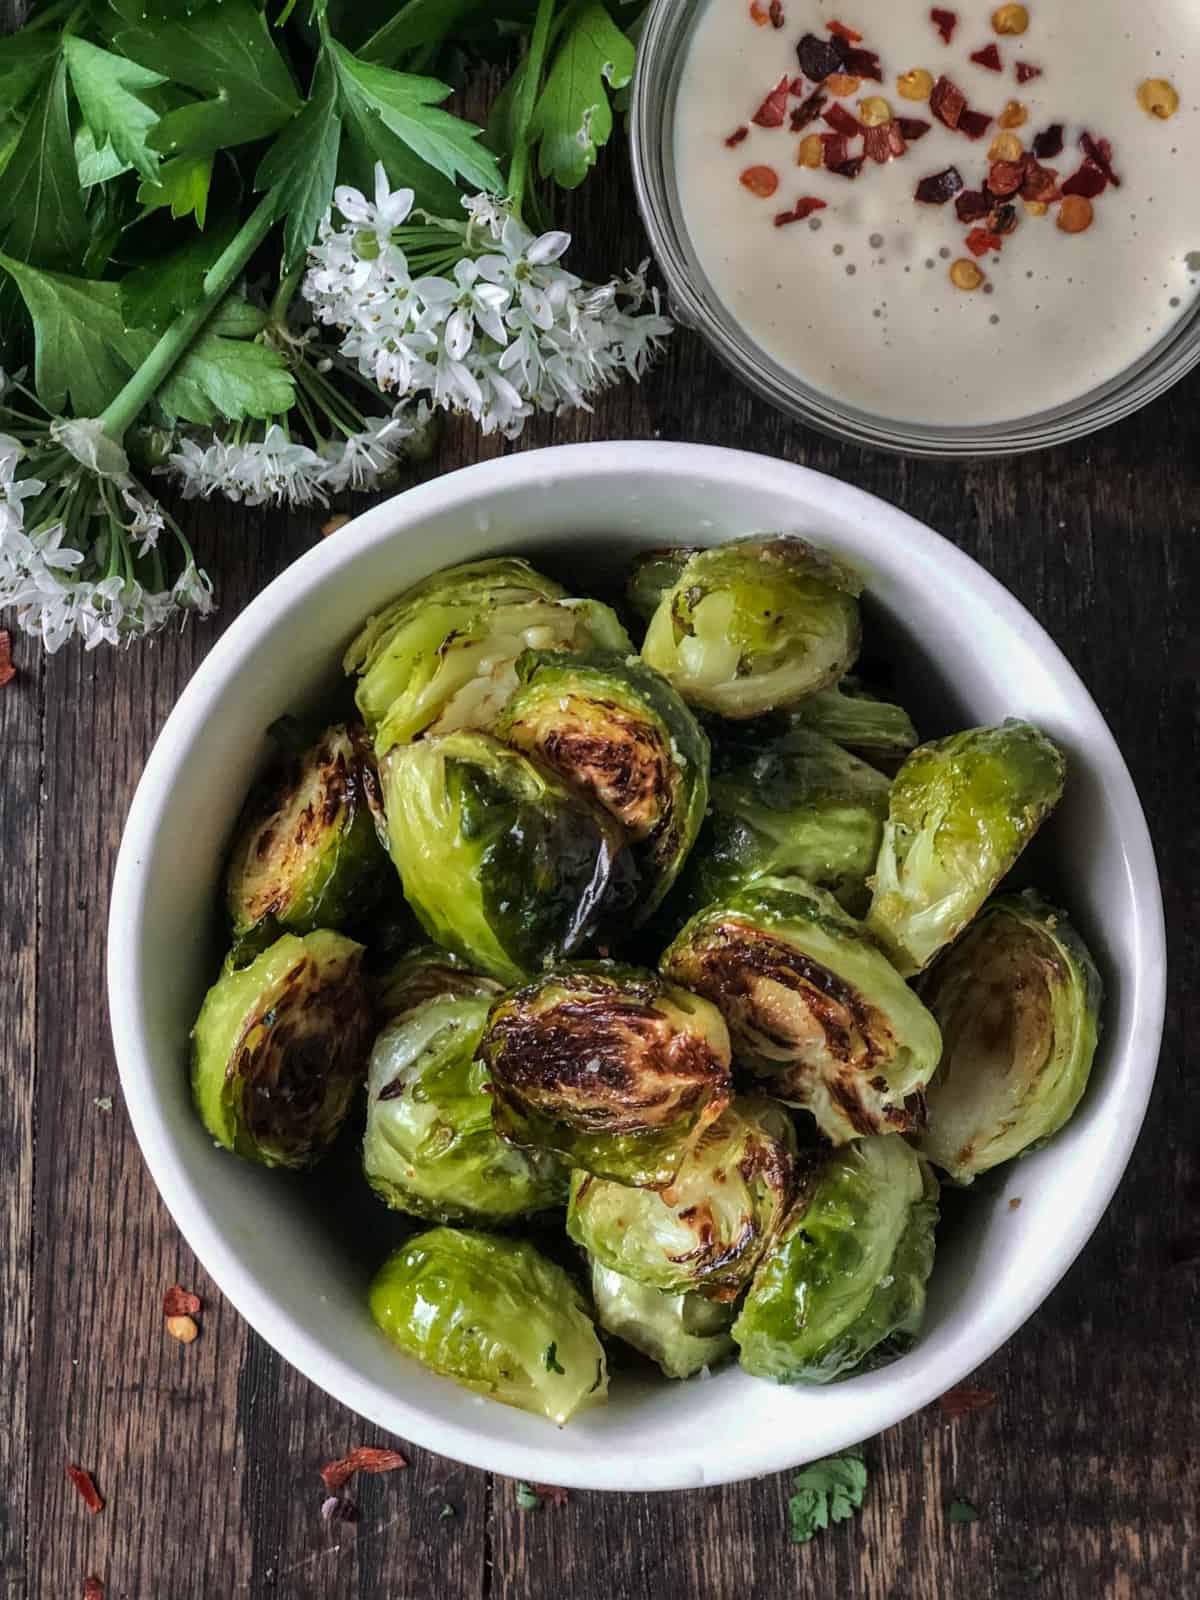 Oven roasted Brussels sprouts in a bowl with sauce.